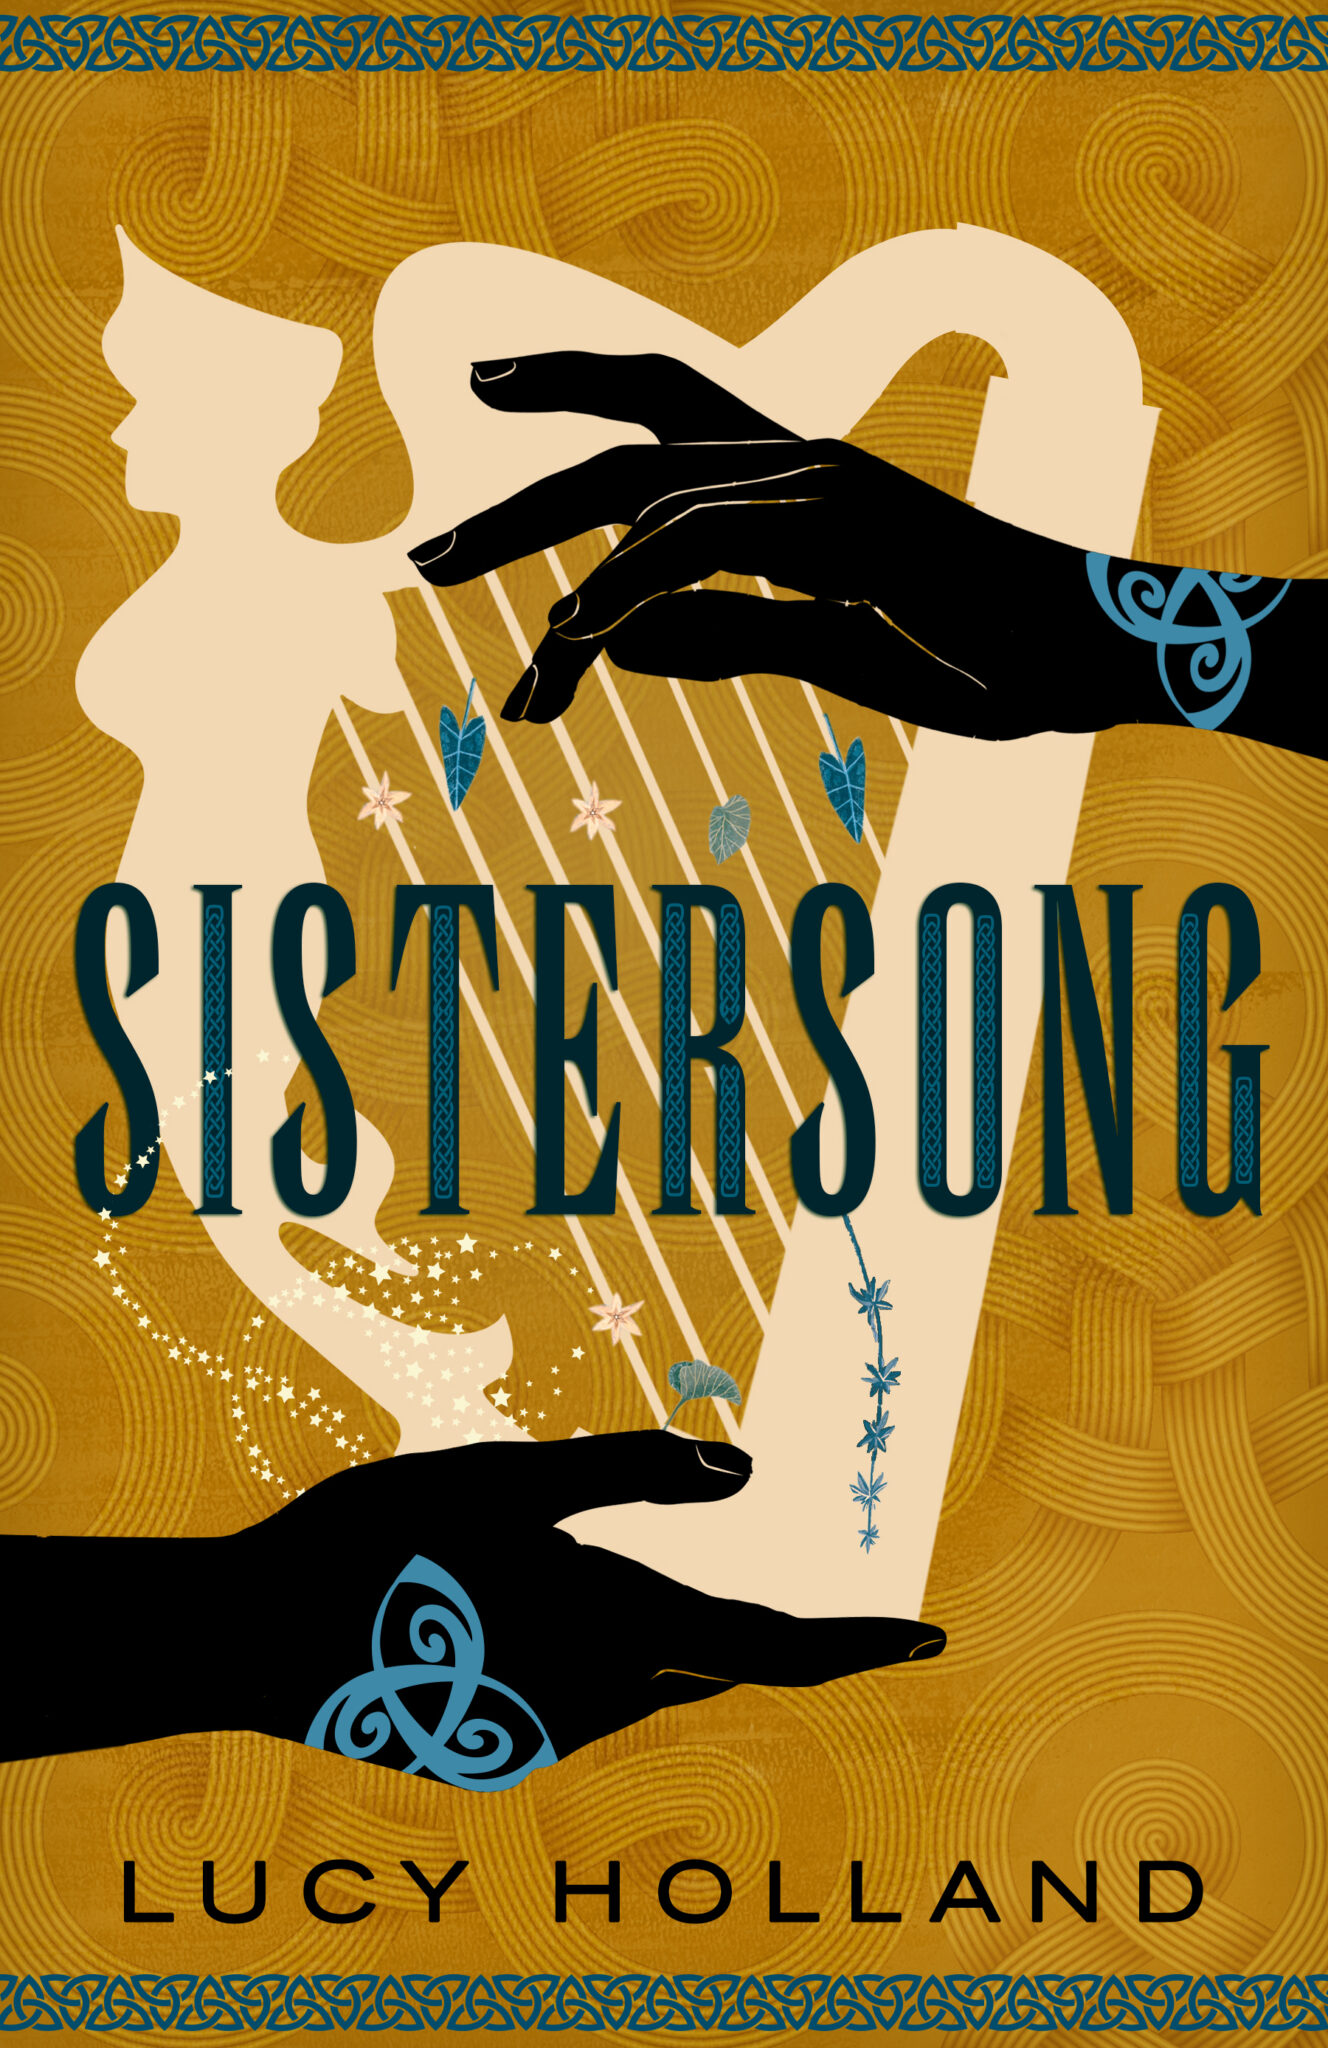 sistersong review